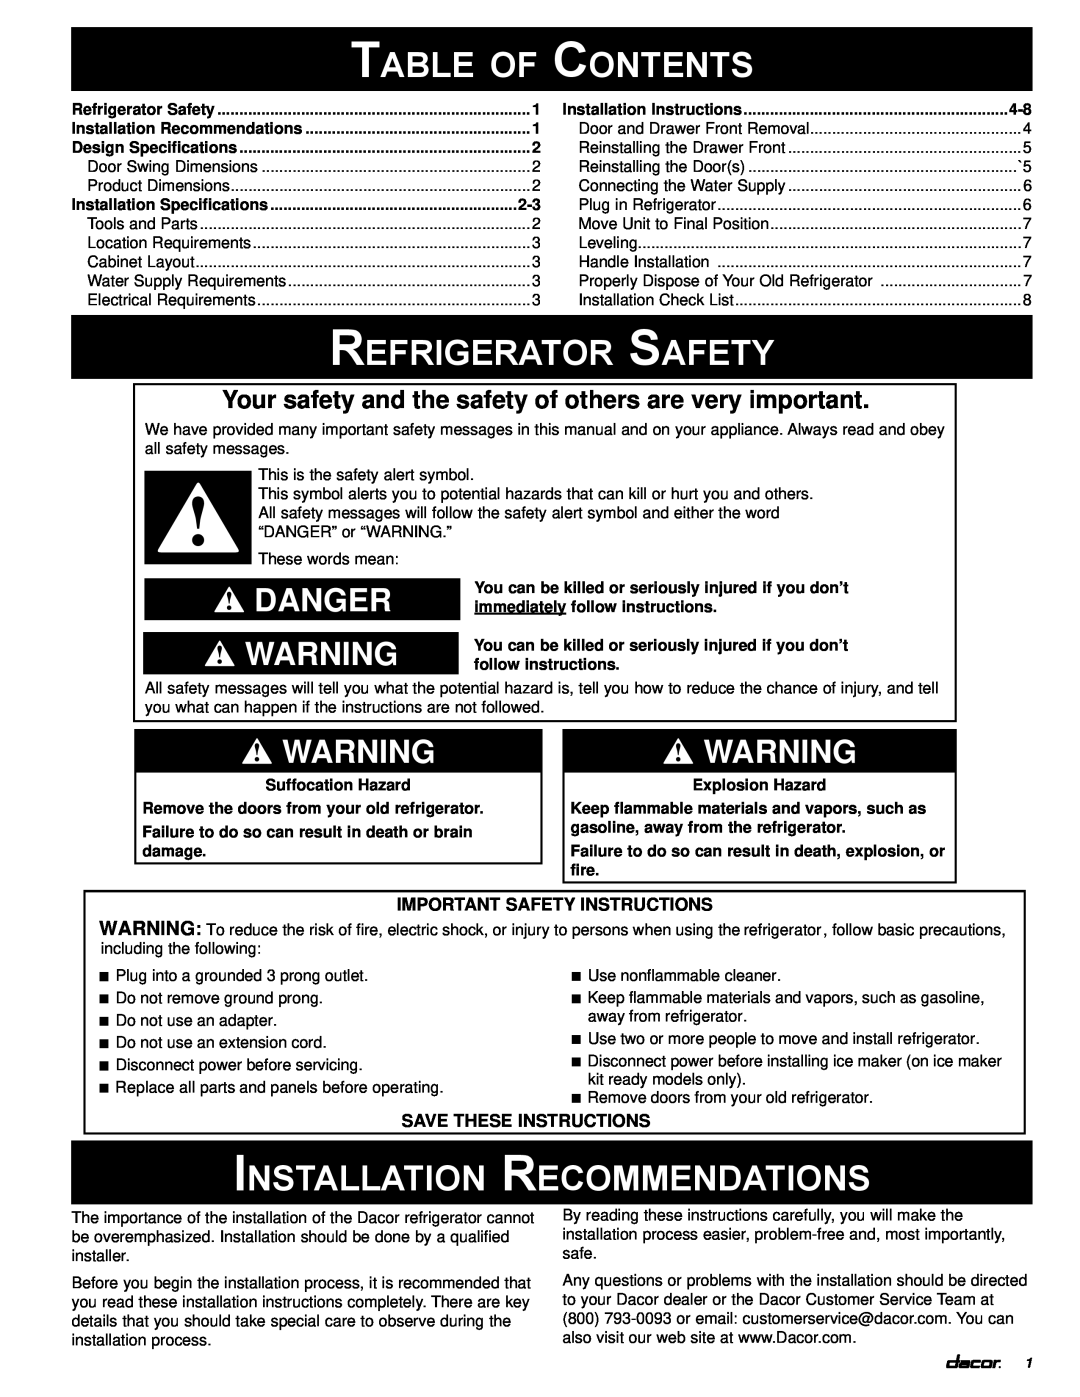 Dacor PF36 Table of Contents, Refrigerator Safety, Installation Recommendations, Danger, IMPORTANT SAFETY instructions 